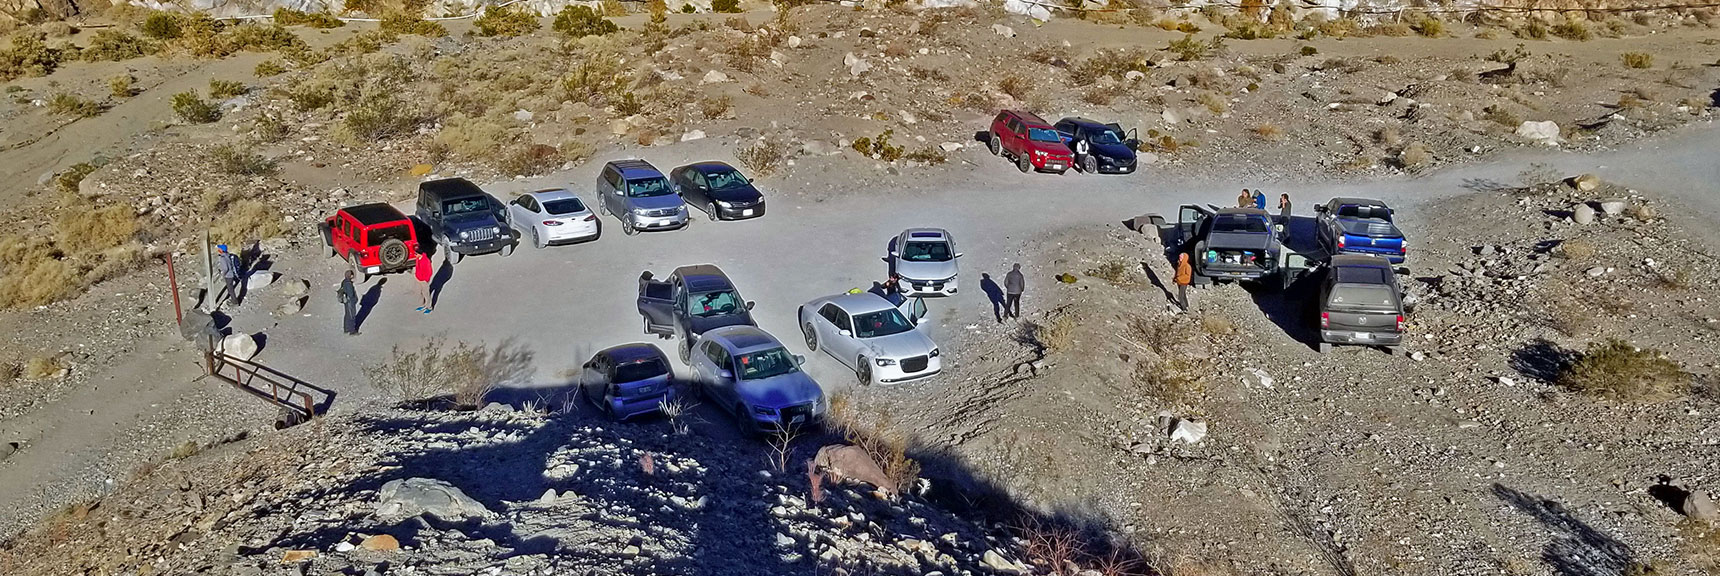 Darwin Falls Trailhead Viewed from Above. Parking Area Can Fill Up Fast. | Darwin Falls, Death Valley National Park, California